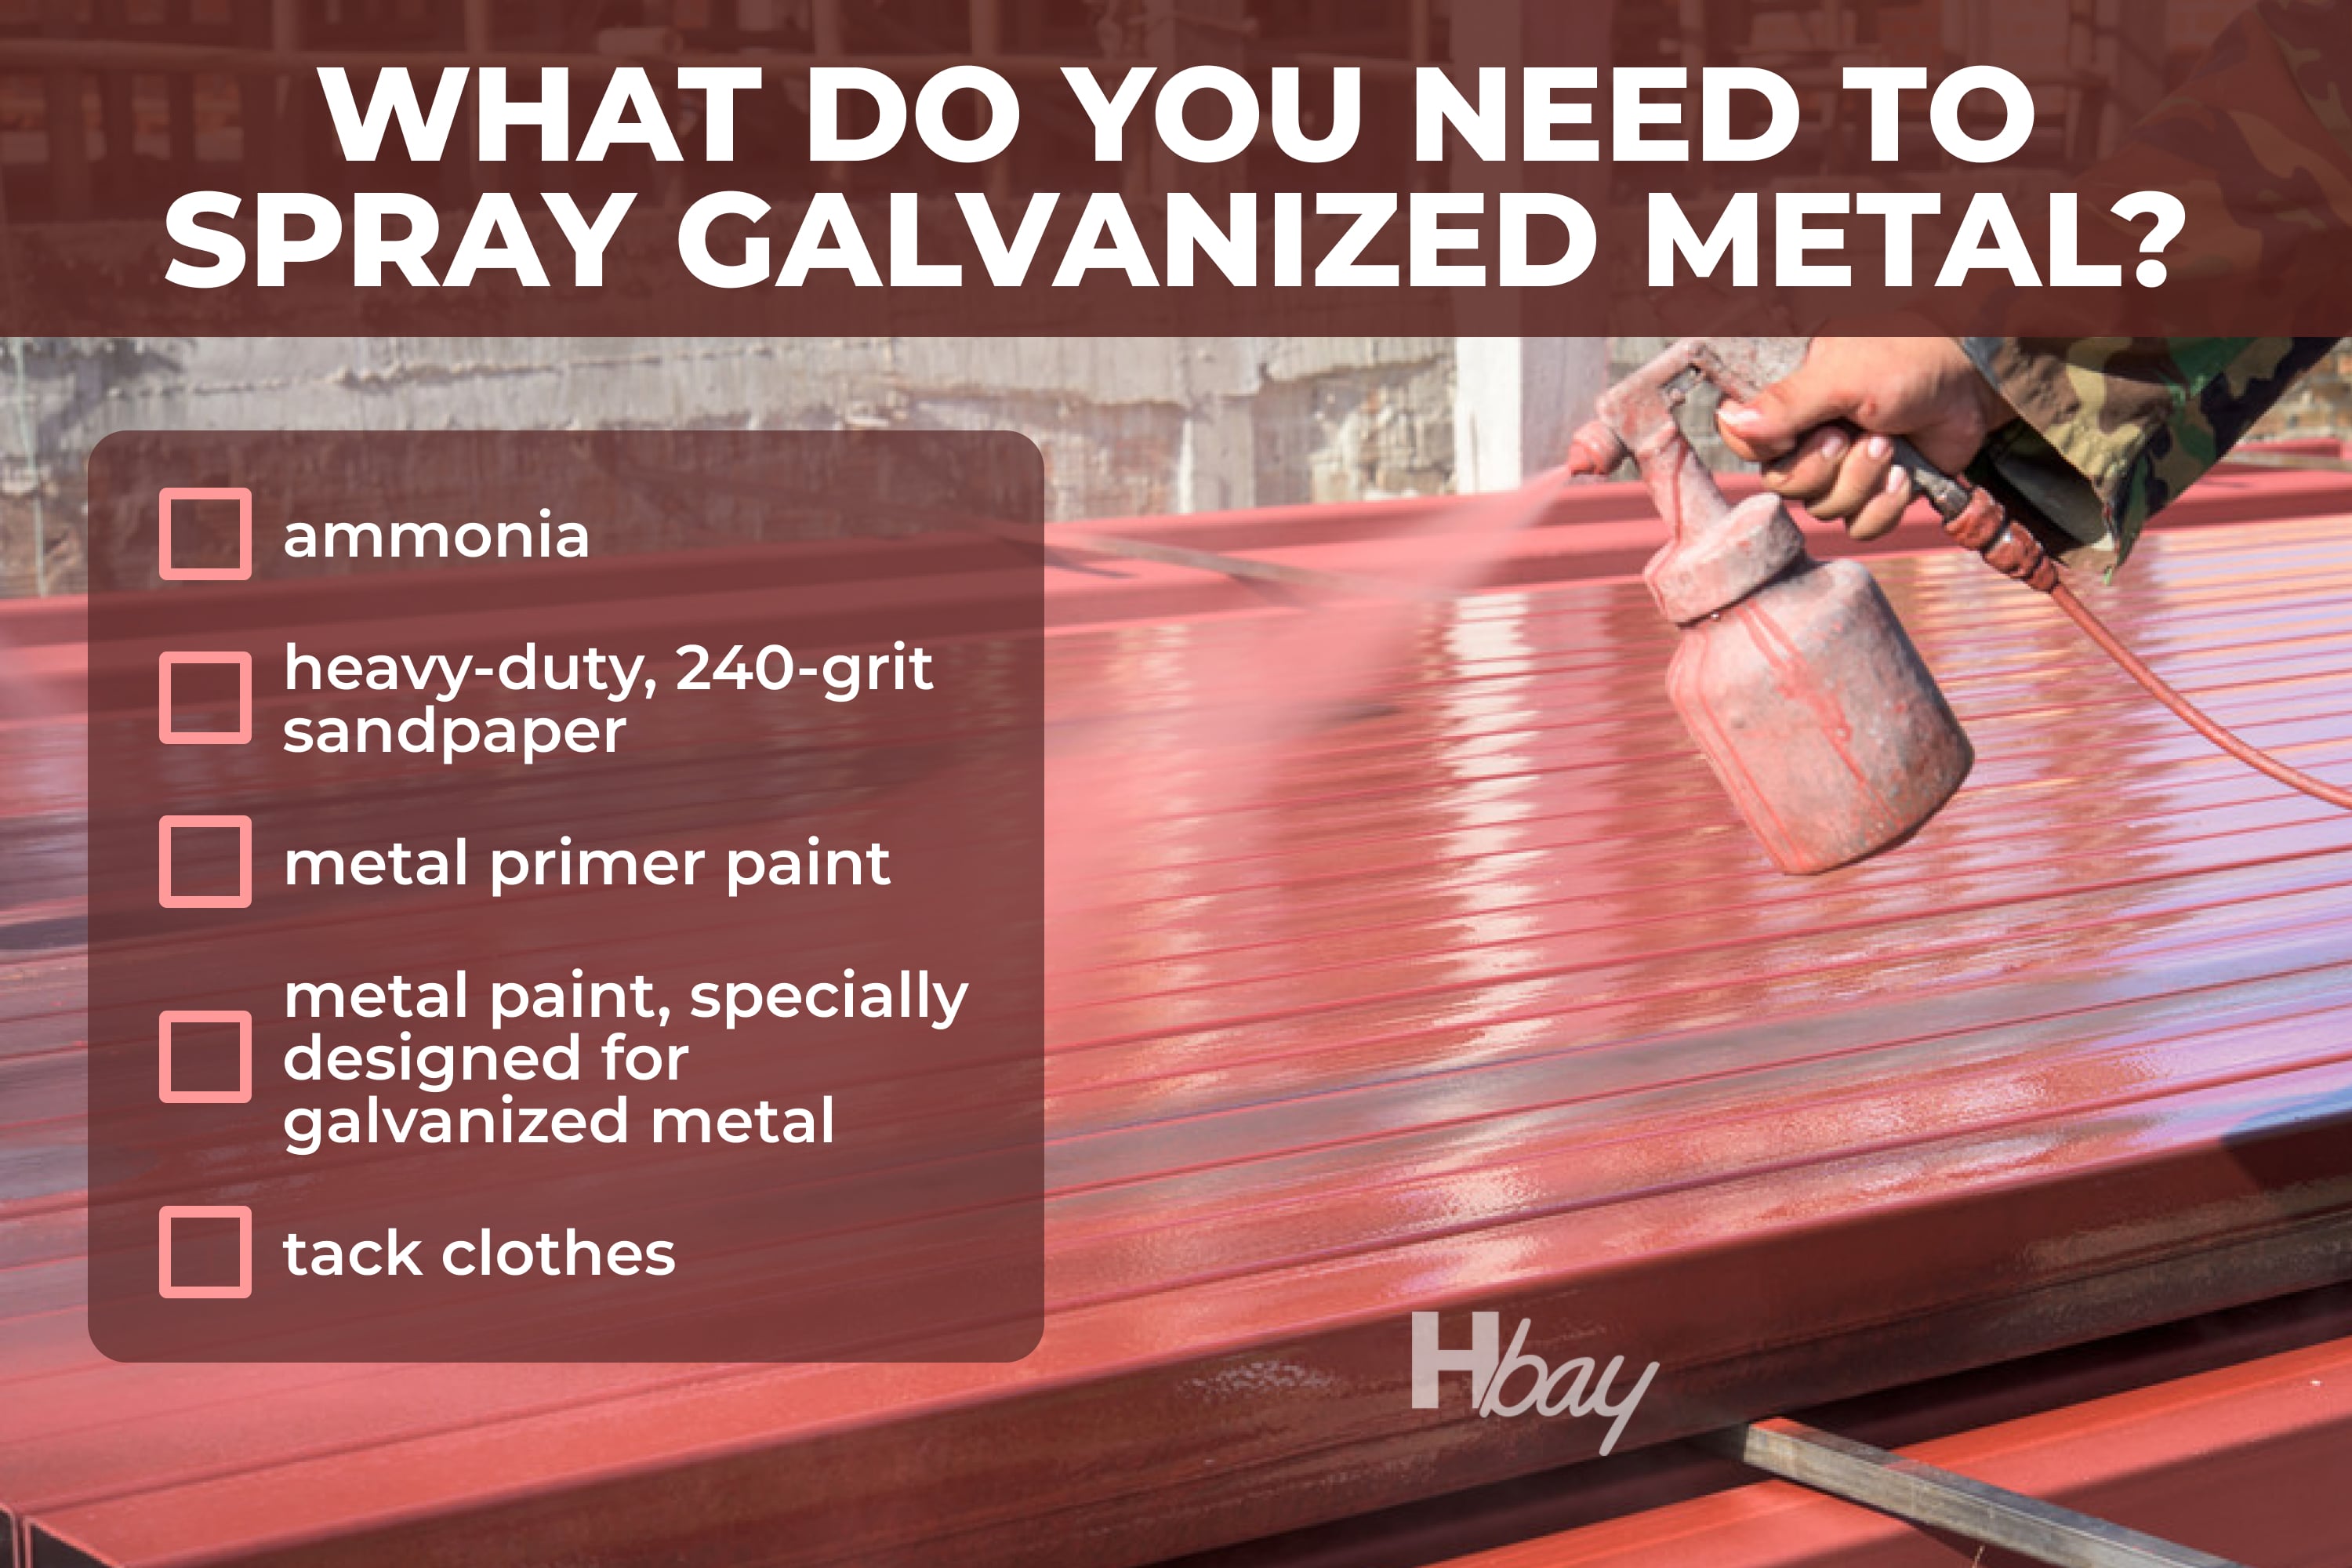 What do you need to spray galvanized metal